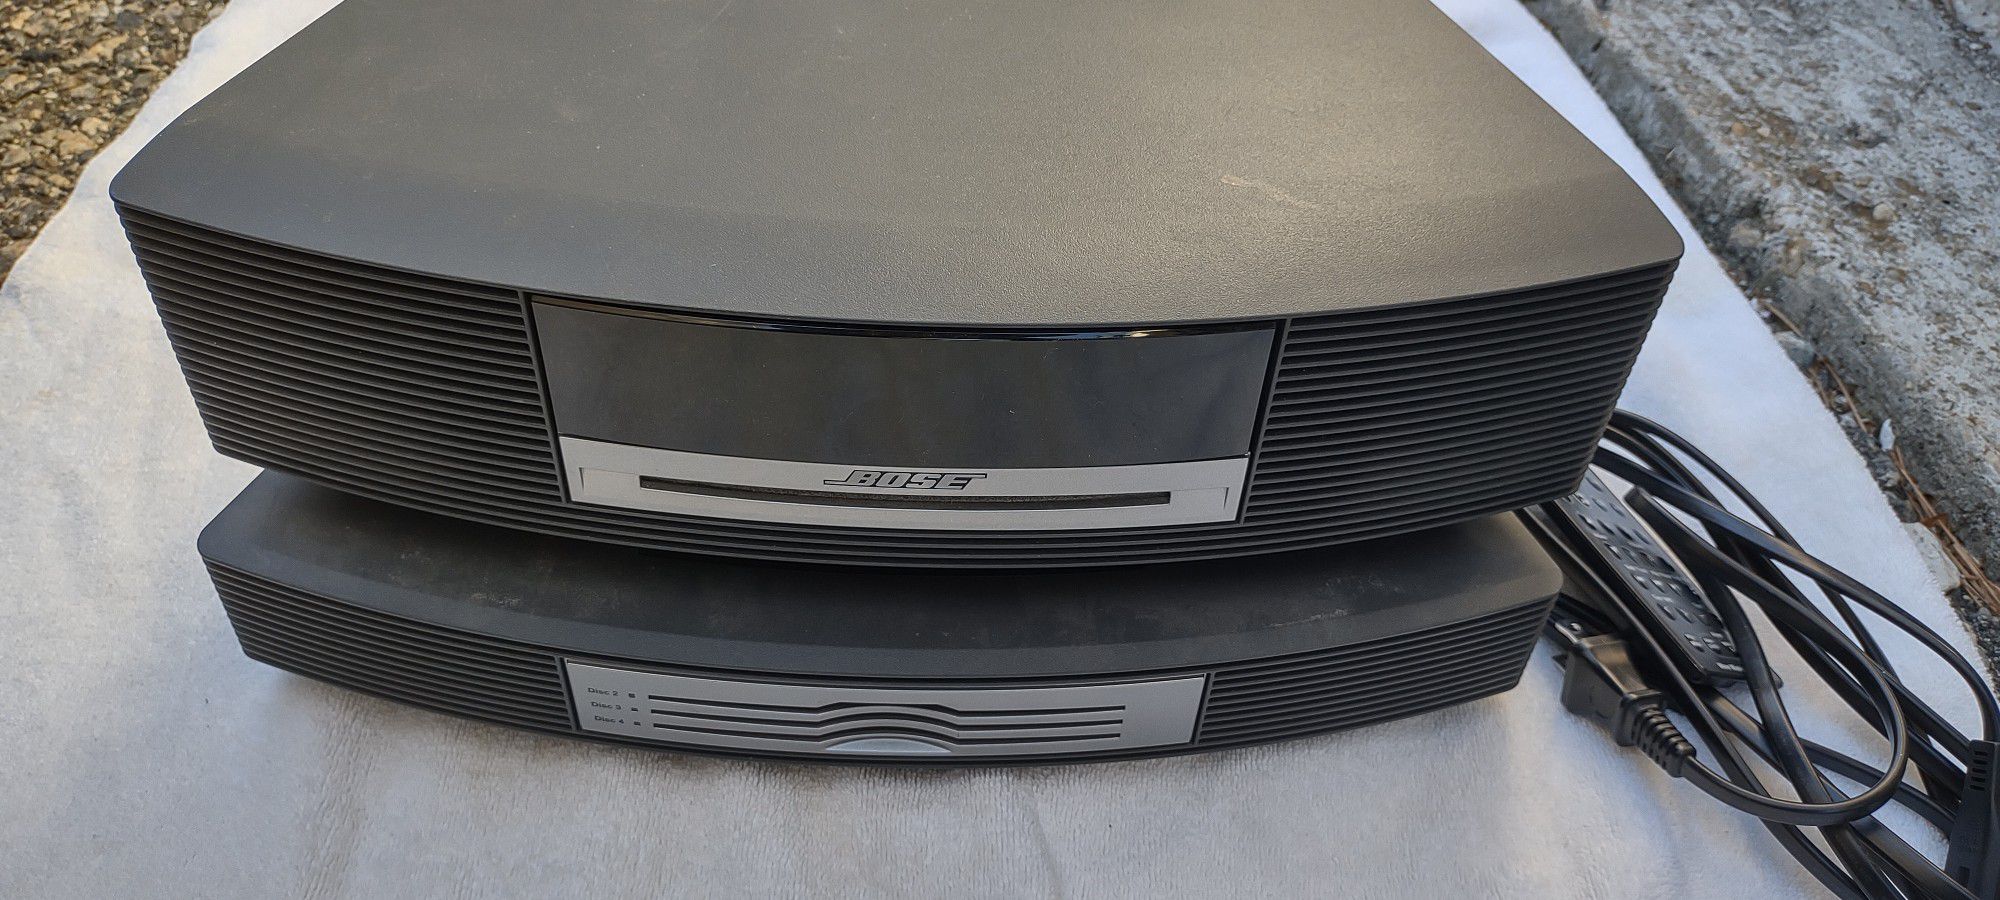 Bose Wave Music System Multi CD Player